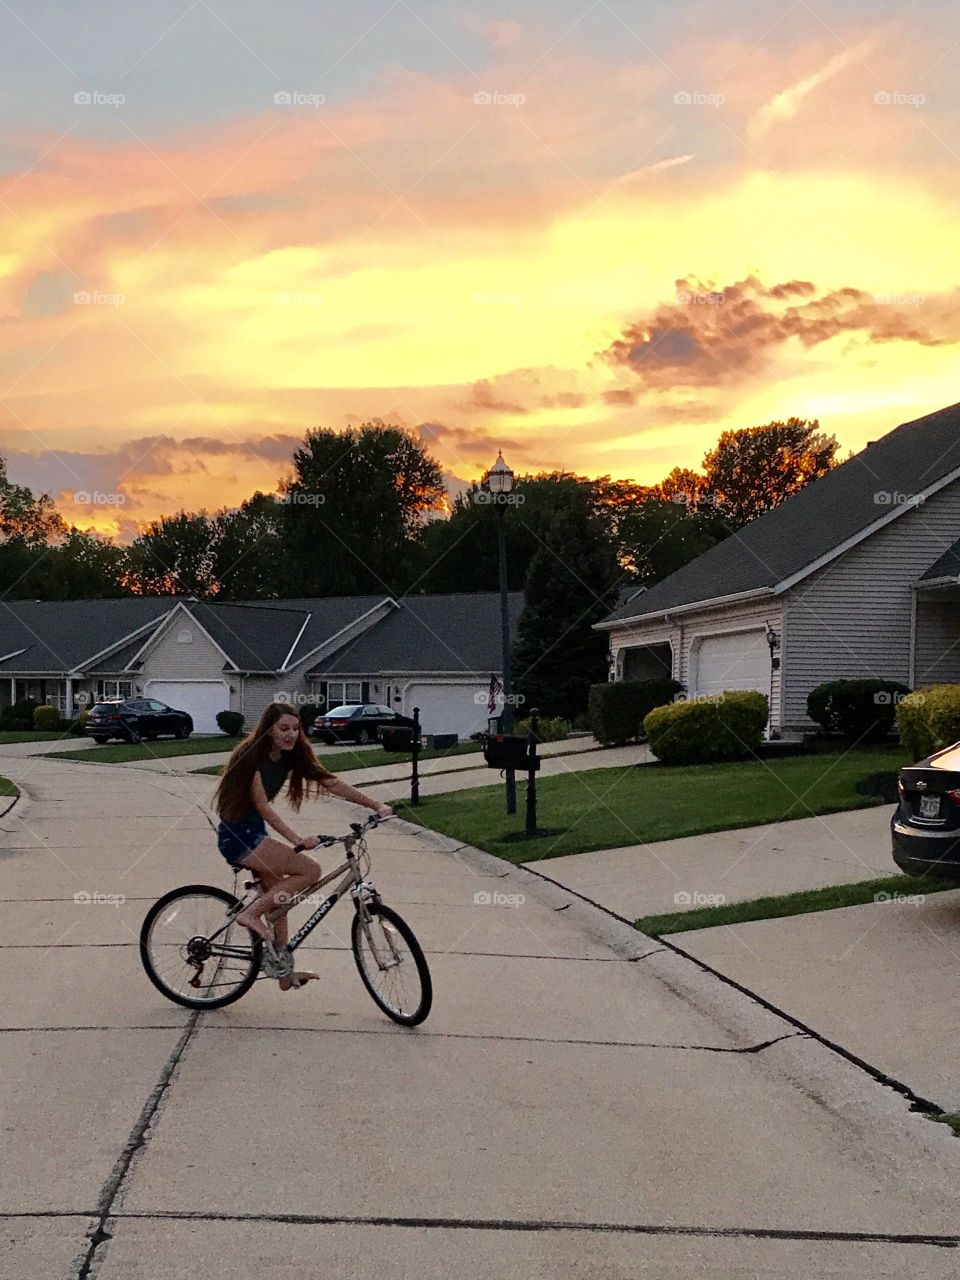 Girl riding bicycle on road during sunset in town